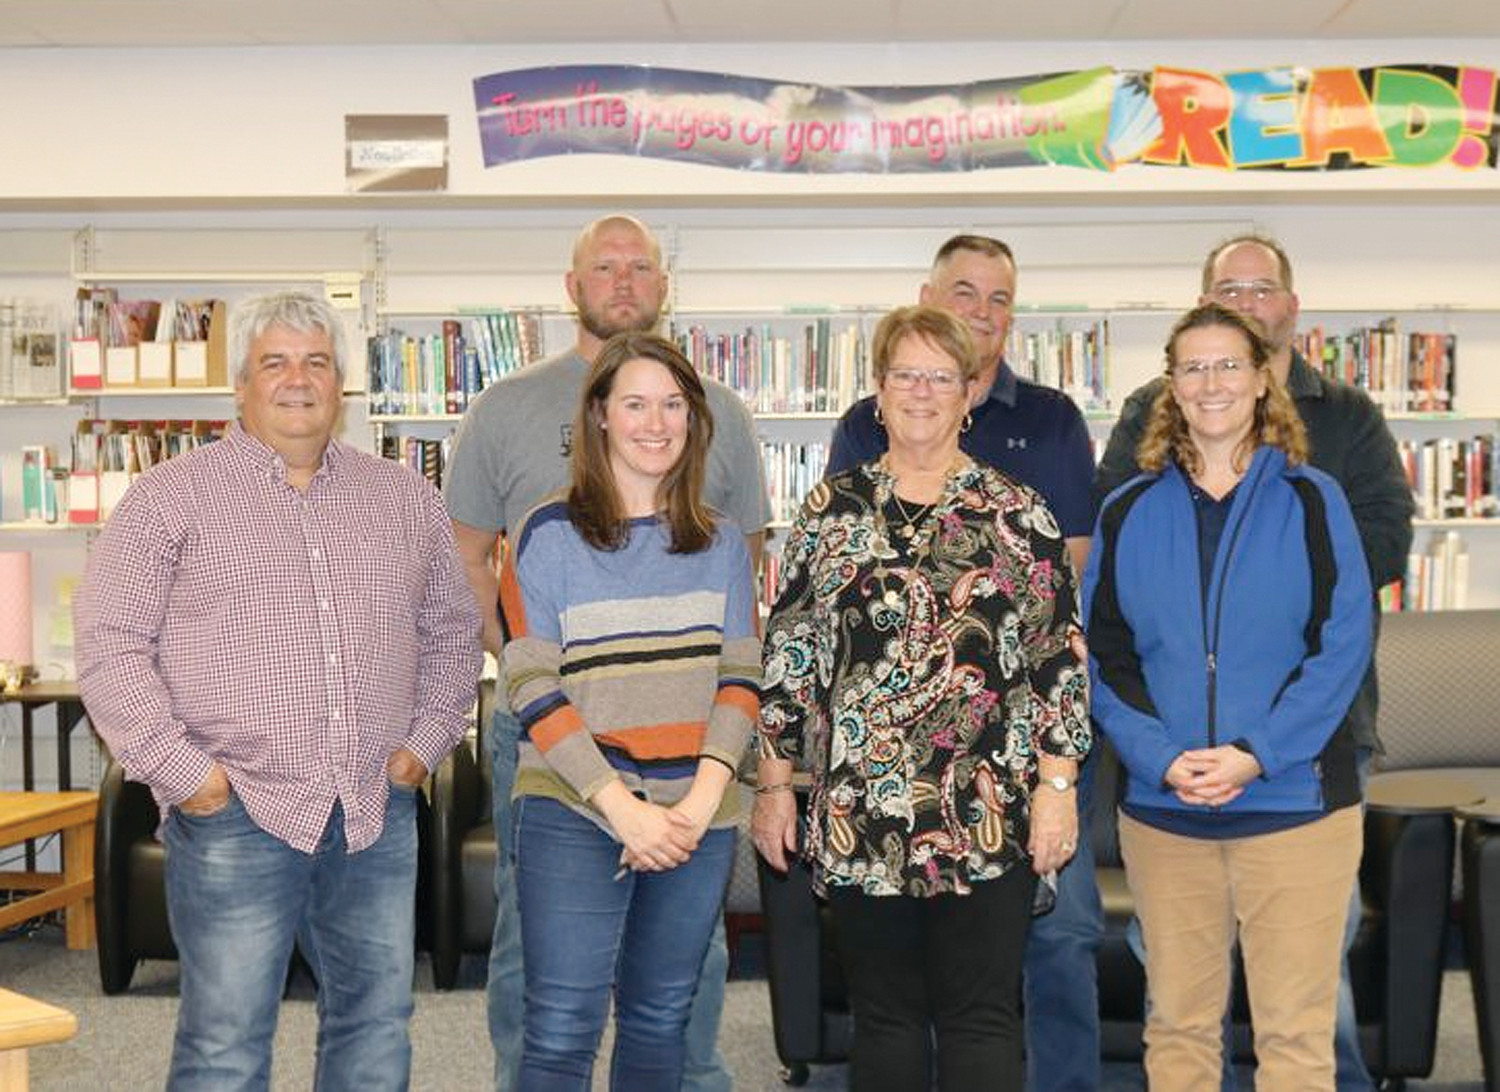 SCHOOL BOARD APPRECIATION MONTH-- Members of the Emmetsburg Community School District Board of Education are pictured (front, from the left) Scott Kibbie, Katy Thomson, Kathy Roethler, Board Vice President, and Jane Hoyman, Board President; (back) Aaron Dietrich, Bill Huberty and Val Morton. With the onset of COVD, the school board has been forced to make tough decisions impacting the health and safety of students and staff throughout the past year.